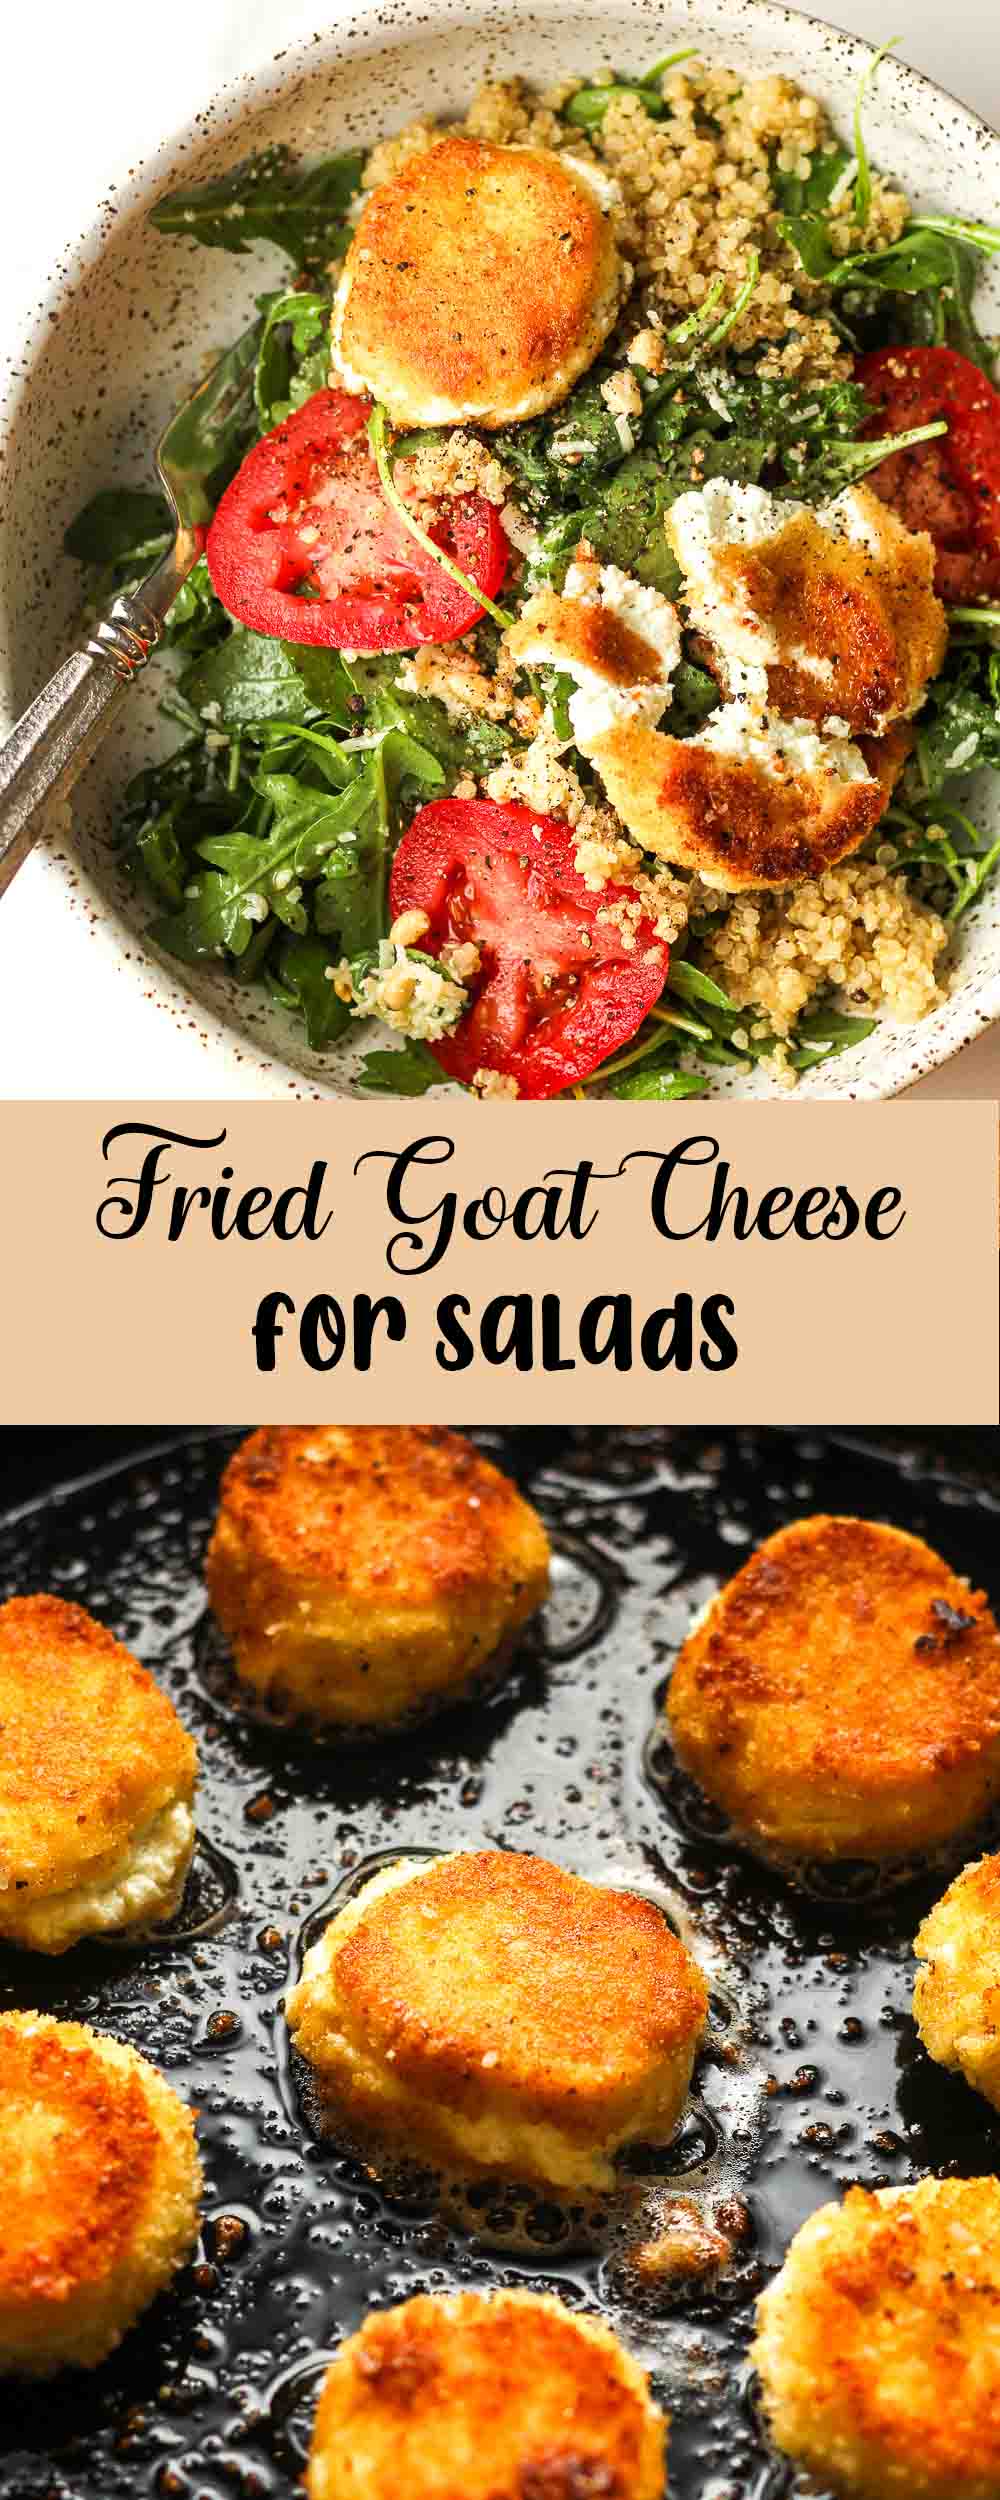 A collage of photos for fried goat cheese for salads.